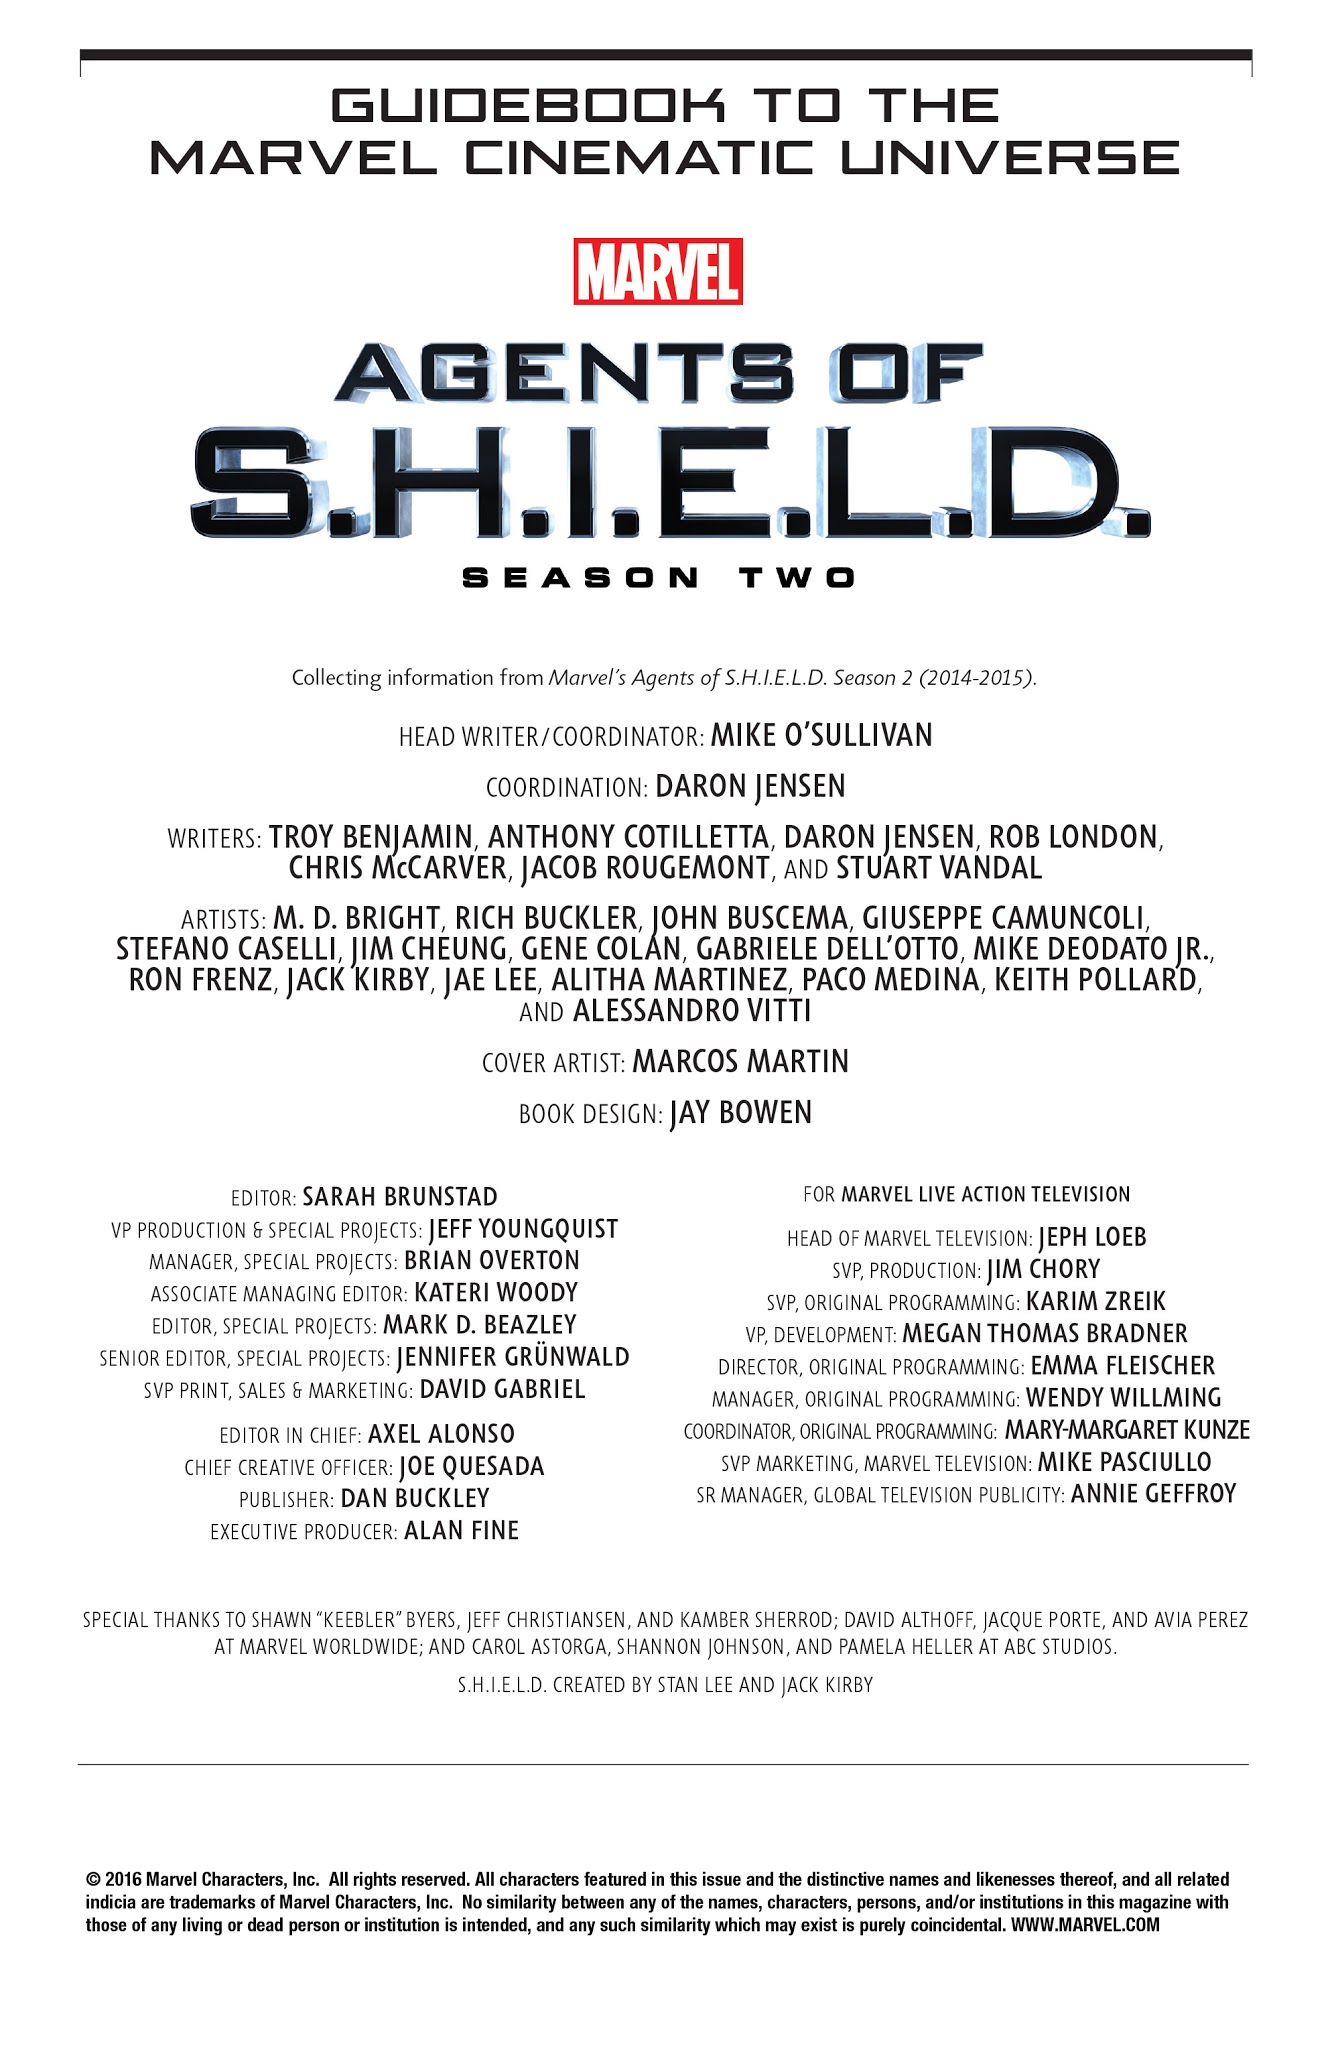 Read online Guidebook to the Marvel Cinematic Universe - Marvel's Agents of S.H.I.E.L.D. Season Two comic -  Issue # Full - 2